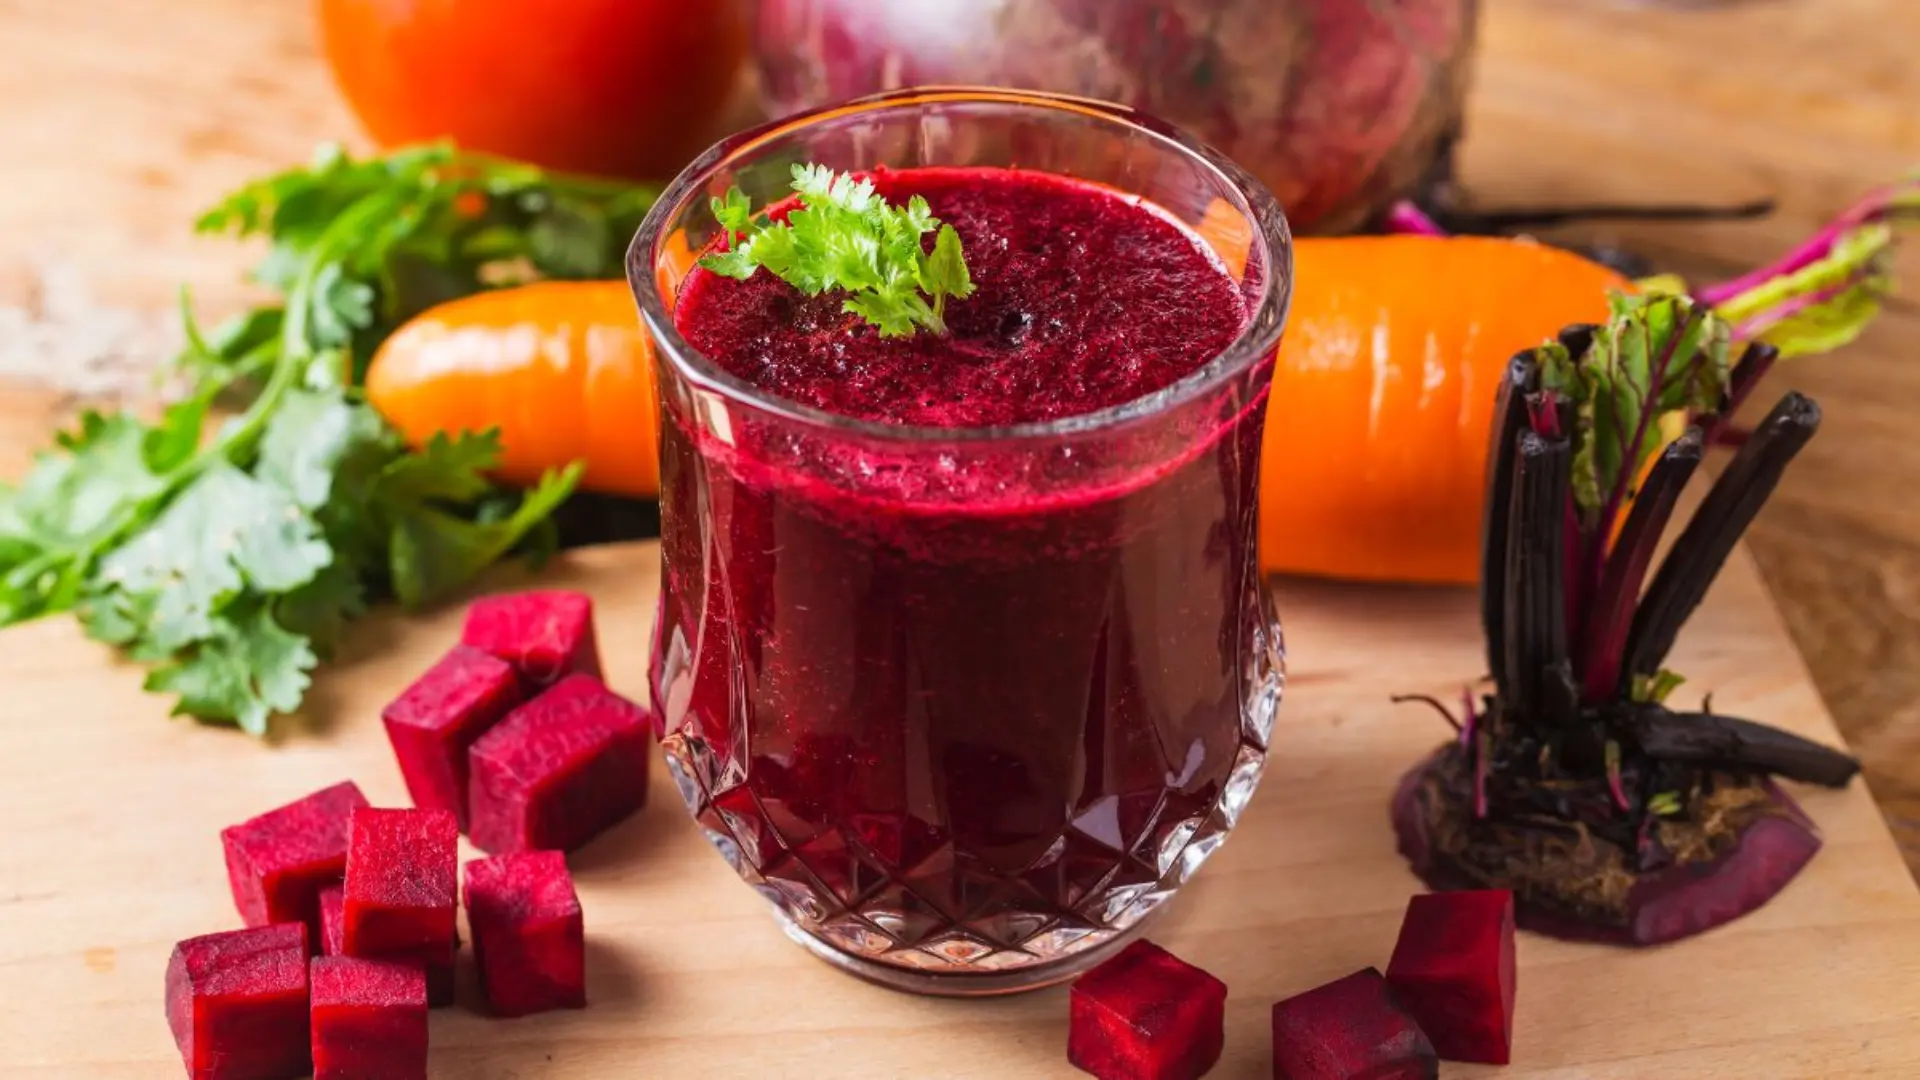 Revitalize with carrot beetroot juice! Learn its varied uses, benefits for heart, blood sugar, inflammation, and get tips on safe consumption and side effects.